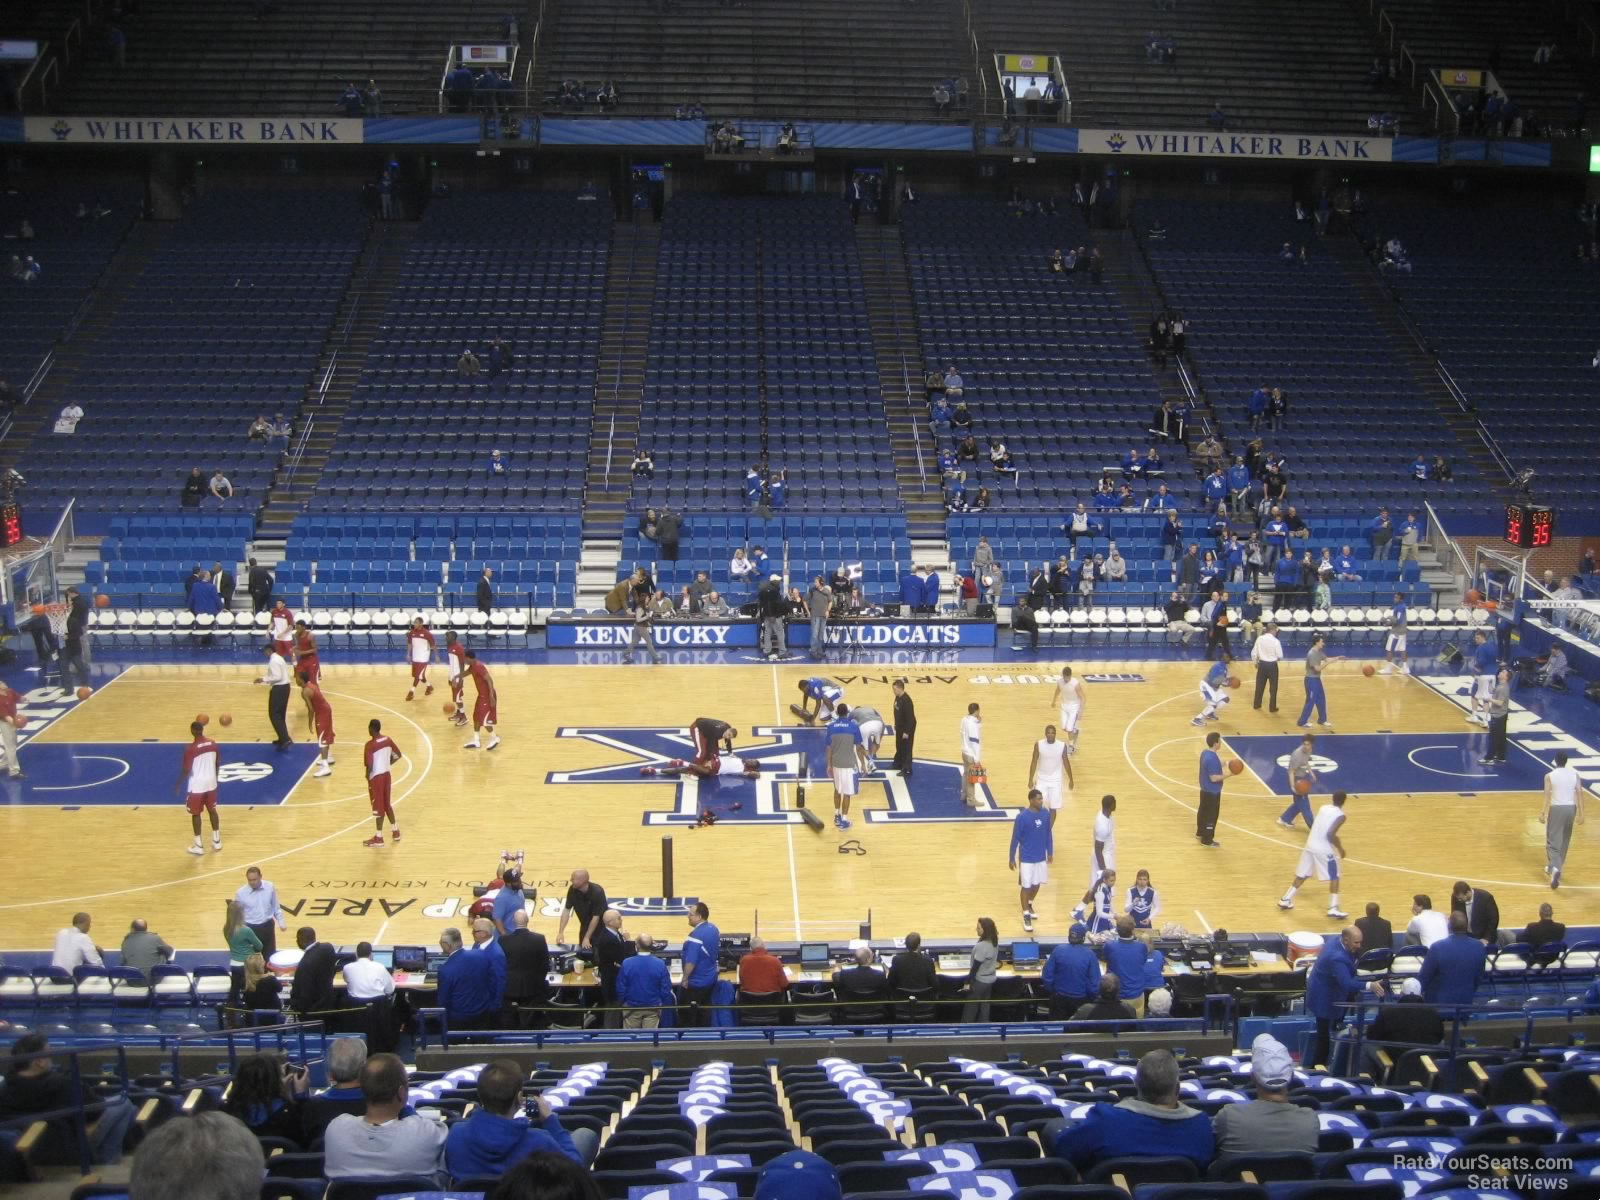 Section 31 at Rupp Arena - RateYourSeats.com